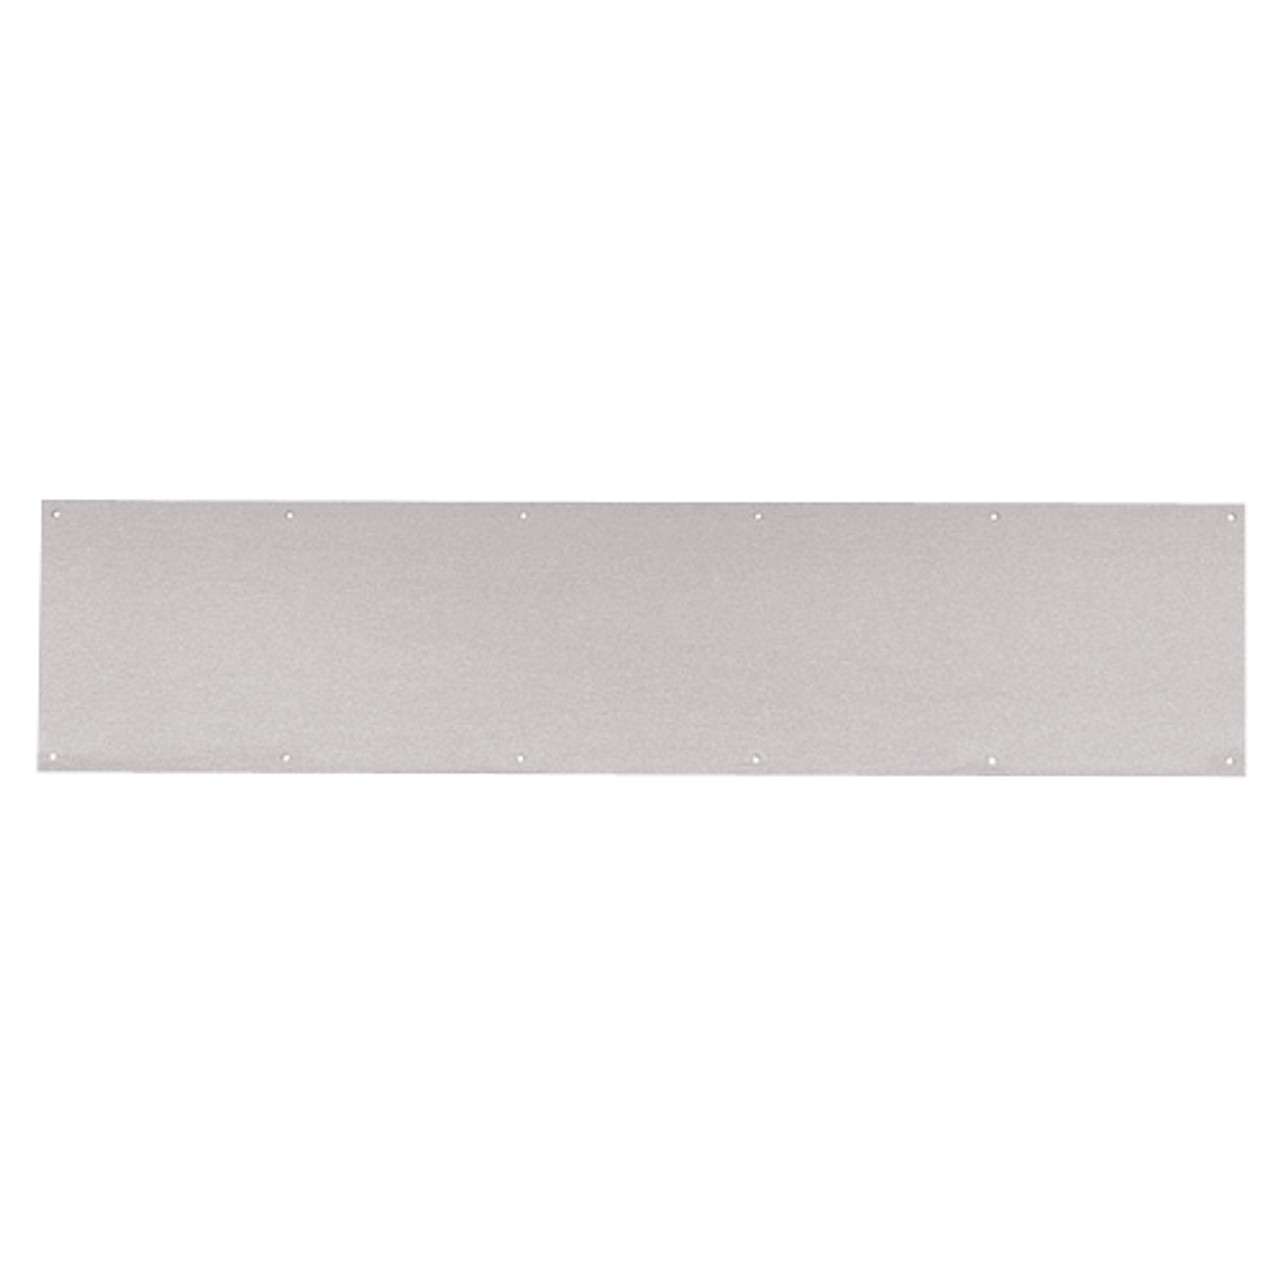 8400-US32D-34x34-B-CS Ives 8400 Series Protection Plate in Satin Stainless Steel